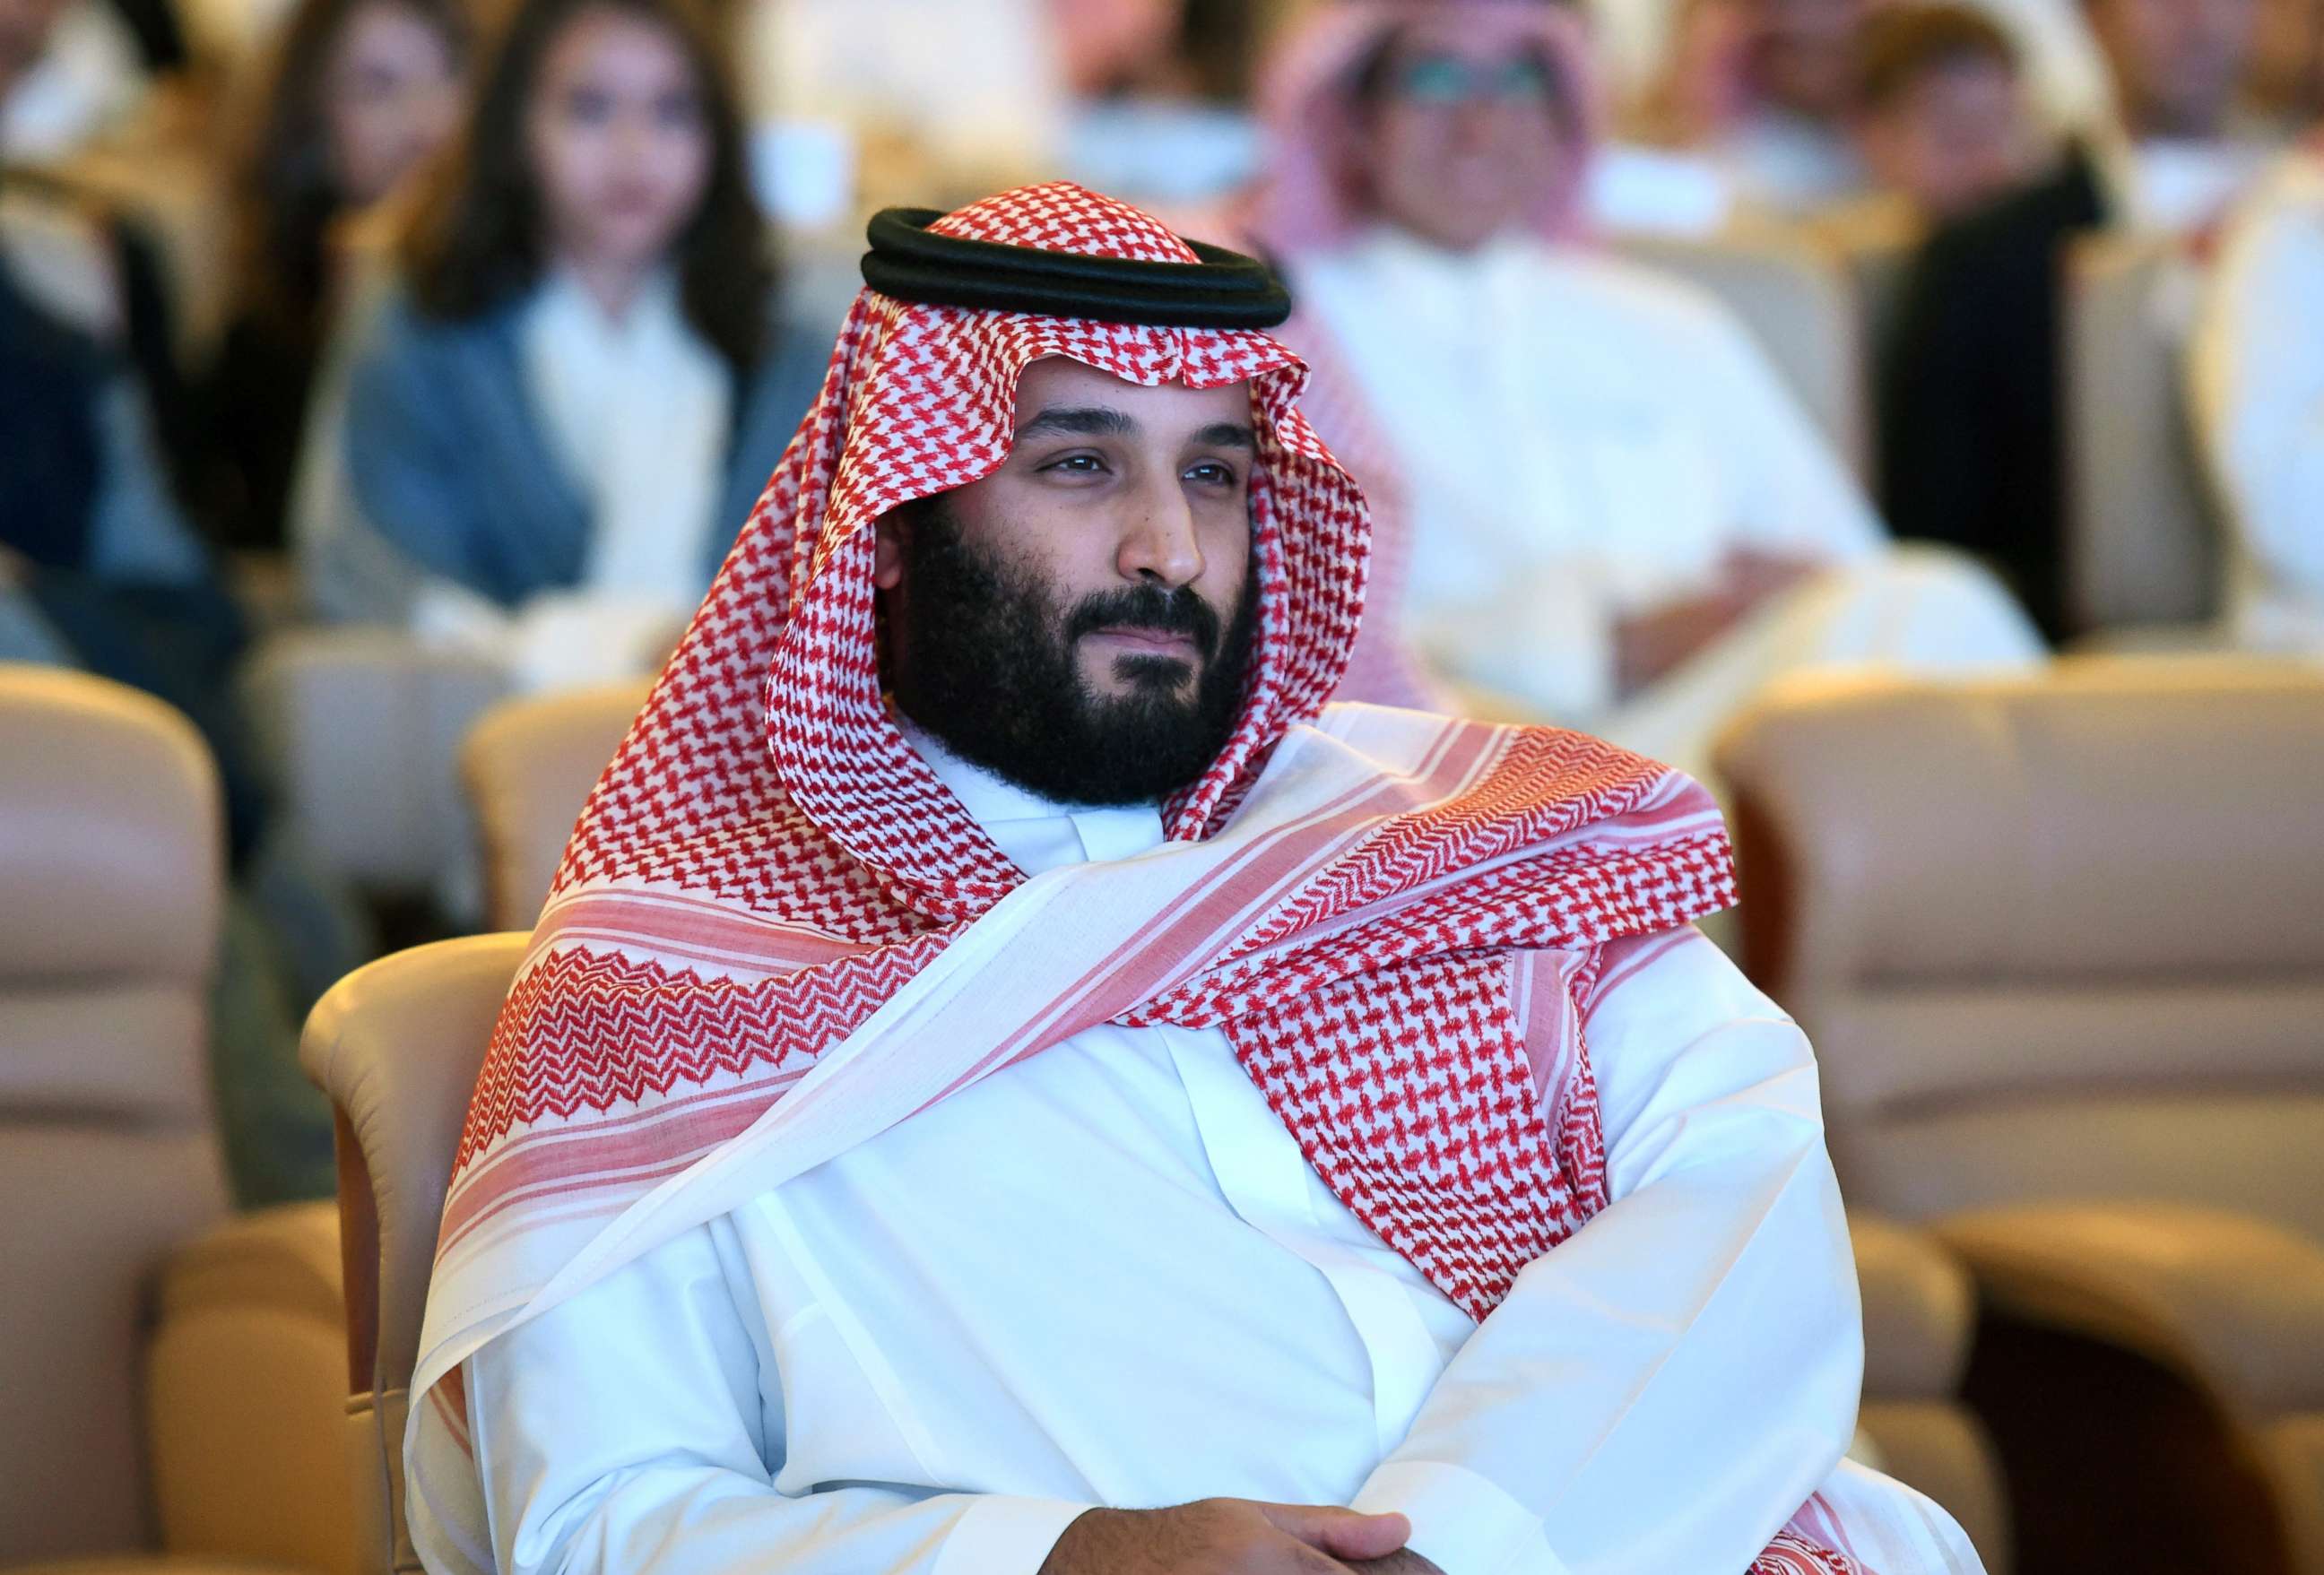 PHOTO: Saudi Crown Prince Mohammed bin Salman attends a conference in Riyadh, on Oct. 24, 2017.